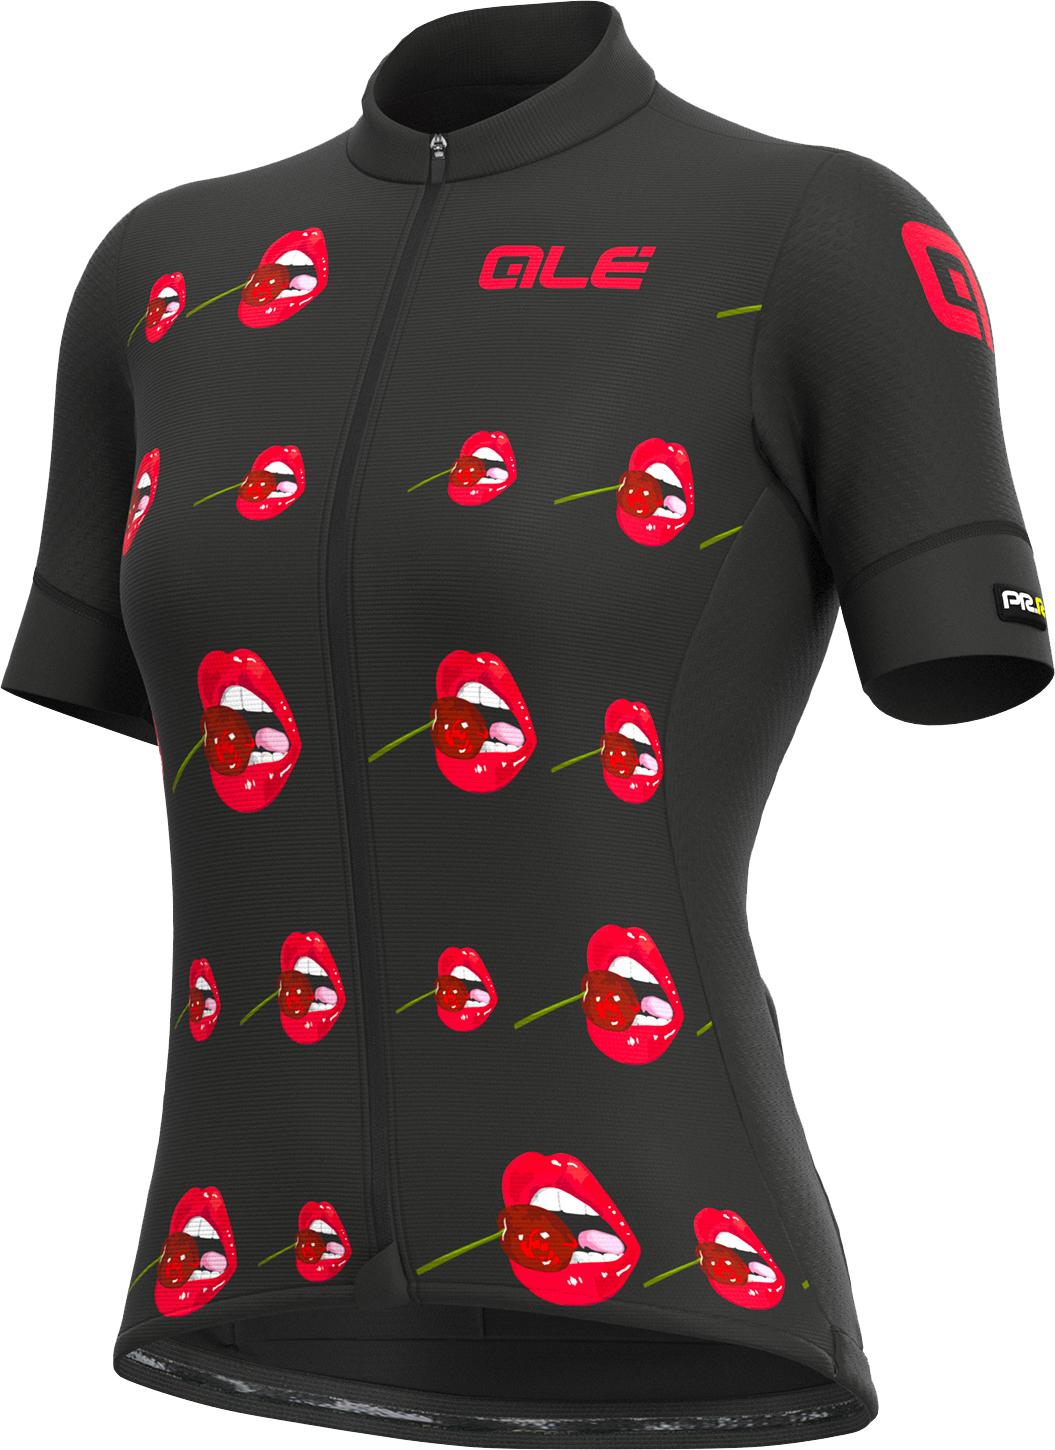 Al Womens Graphics Prr Smile Summer Cycling Jersey - Black/gold